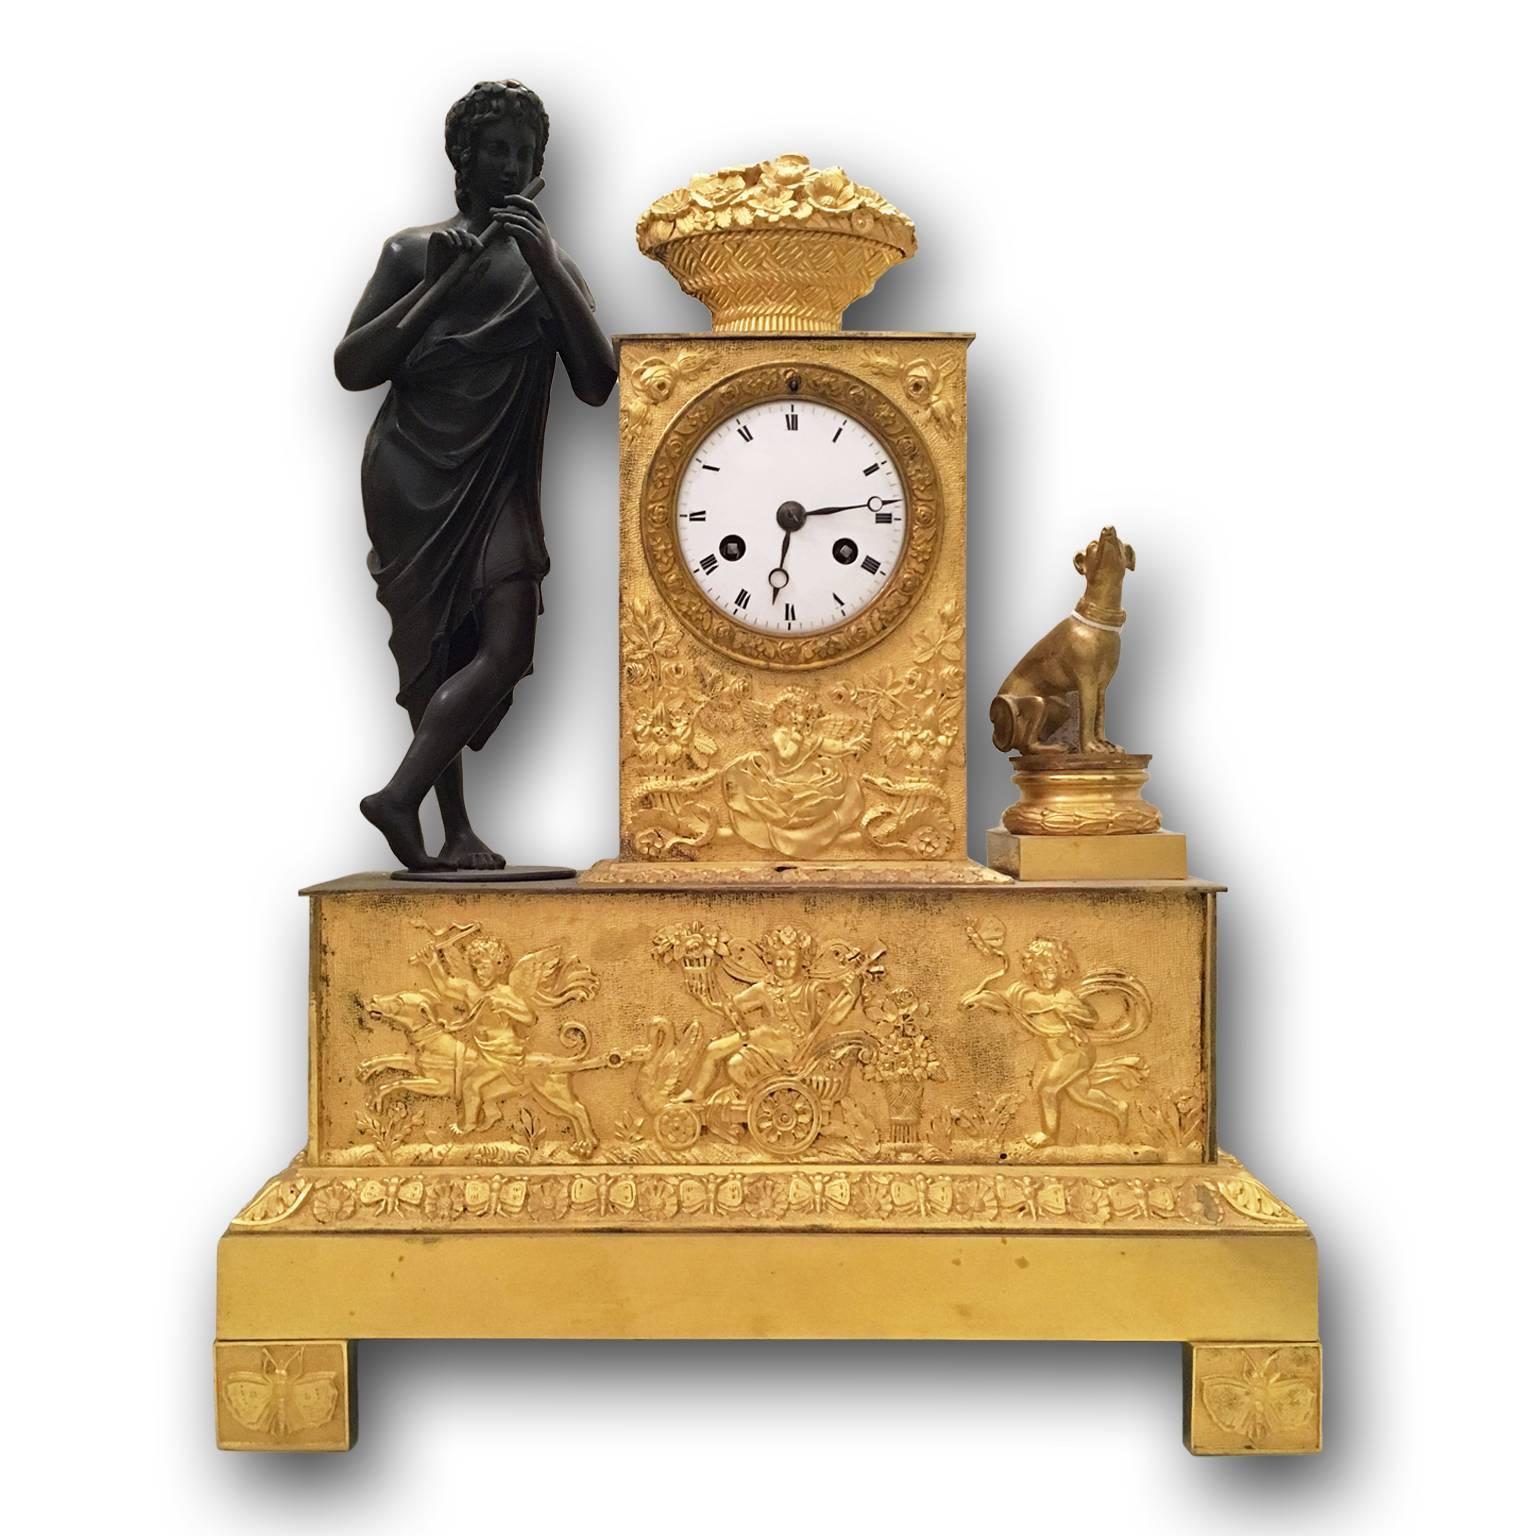 An amazing French neoclassical gilt bronze pendulum clock, retaining its original ormolu gilding, using the technique of lost-wax casting. The rectangular base and the clock case, which contains the dial with Roman numerals, are enriched by reliefs.